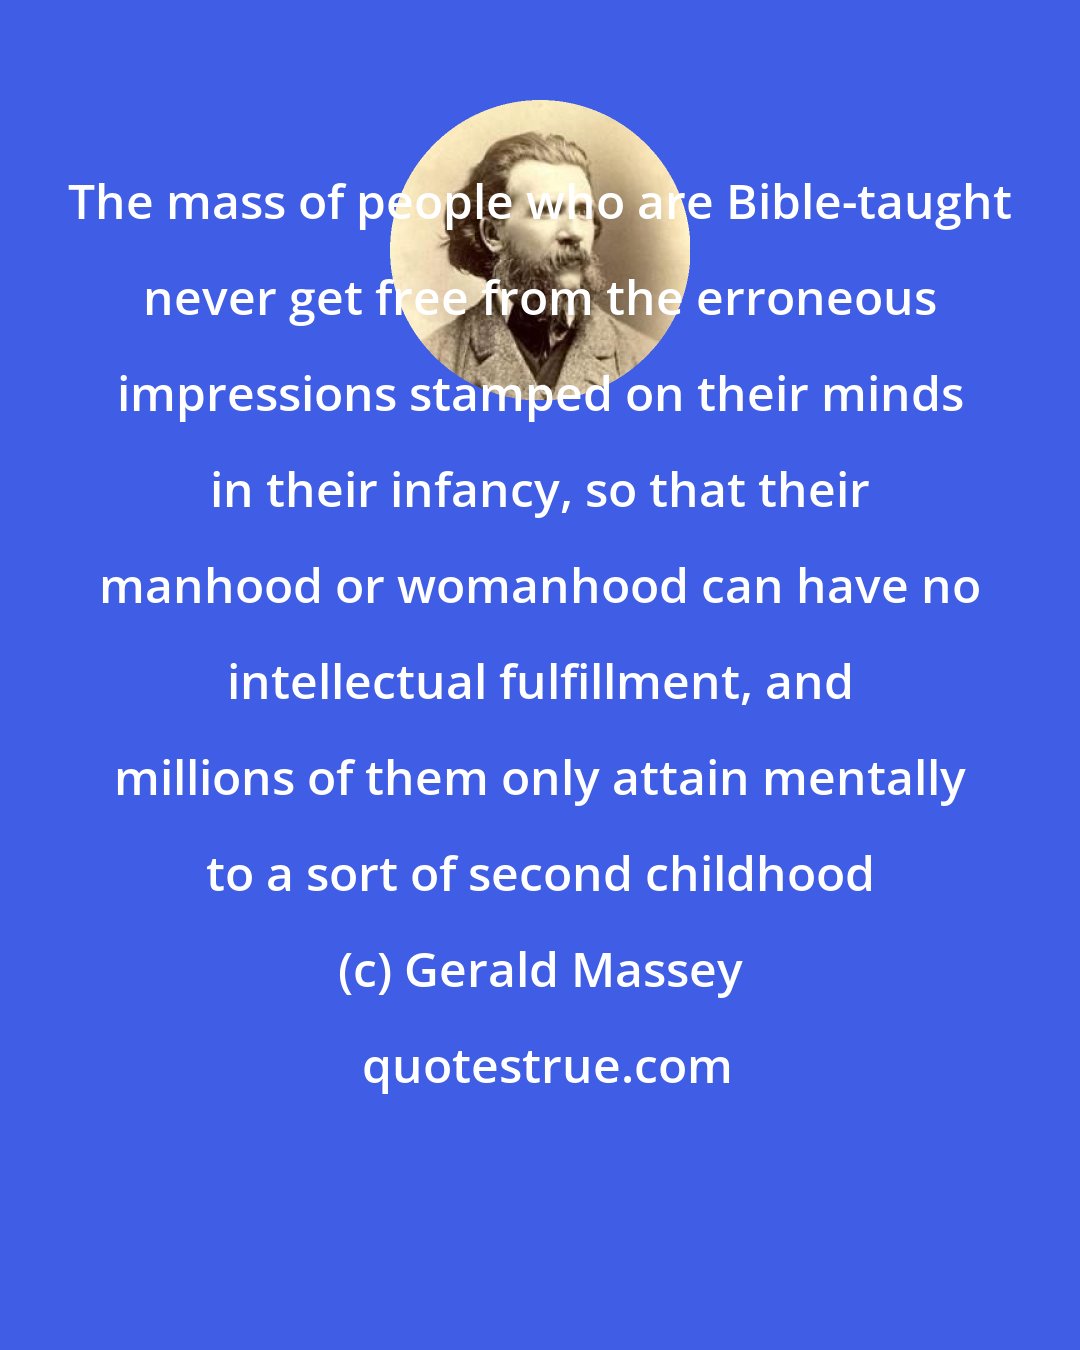 Gerald Massey: The mass of people who are Bible-taught never get free from the erroneous impressions stamped on their minds in their infancy, so that their manhood or womanhood can have no intellectual fulfillment, and millions of them only attain mentally to a sort of second childhood